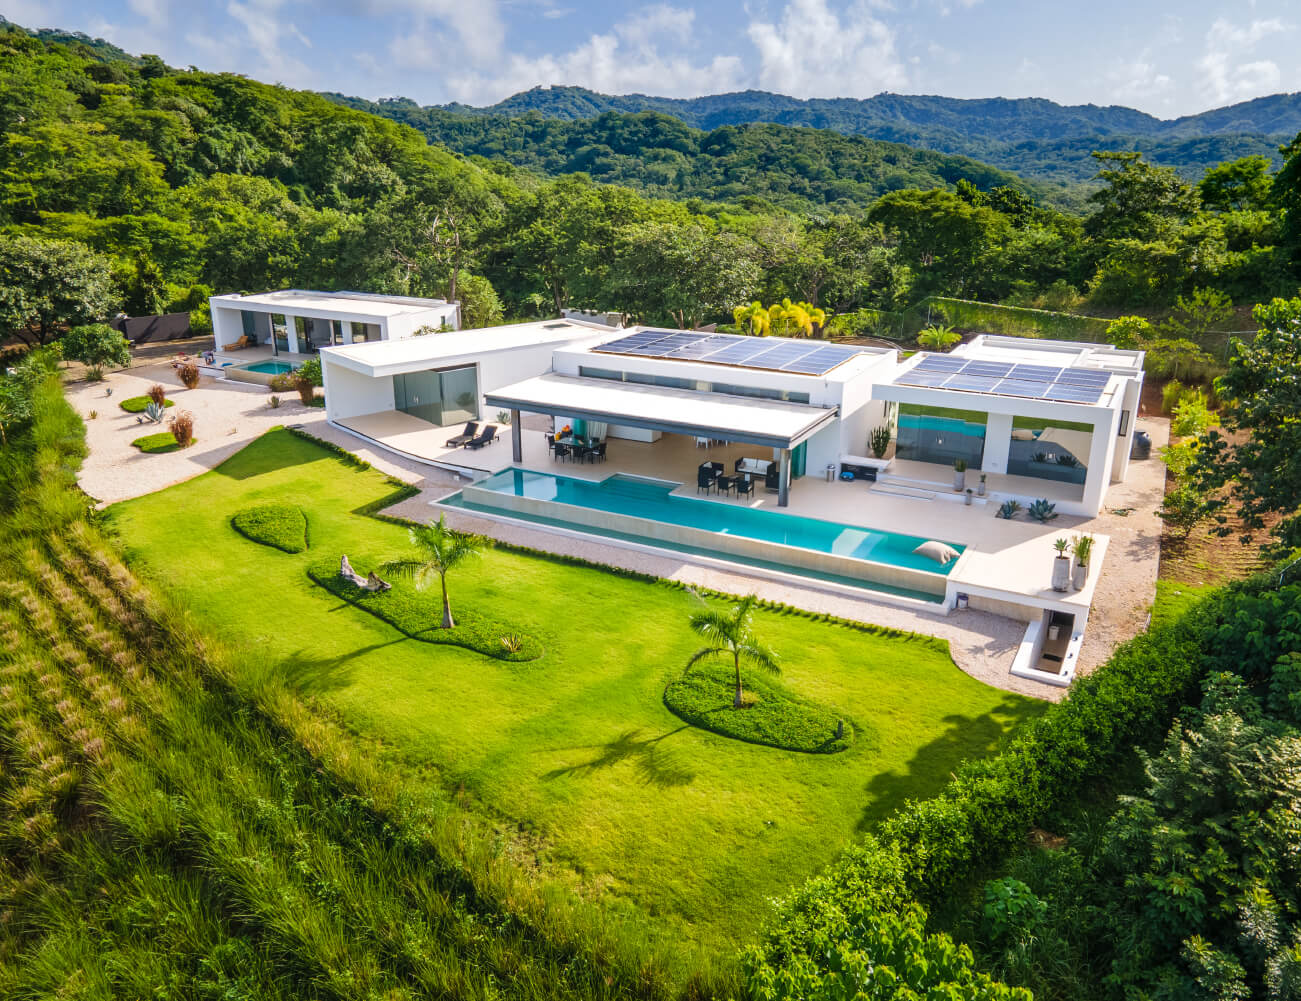 At Properdise we are experts in generating more bookings for your luxury property in Costa Rica.